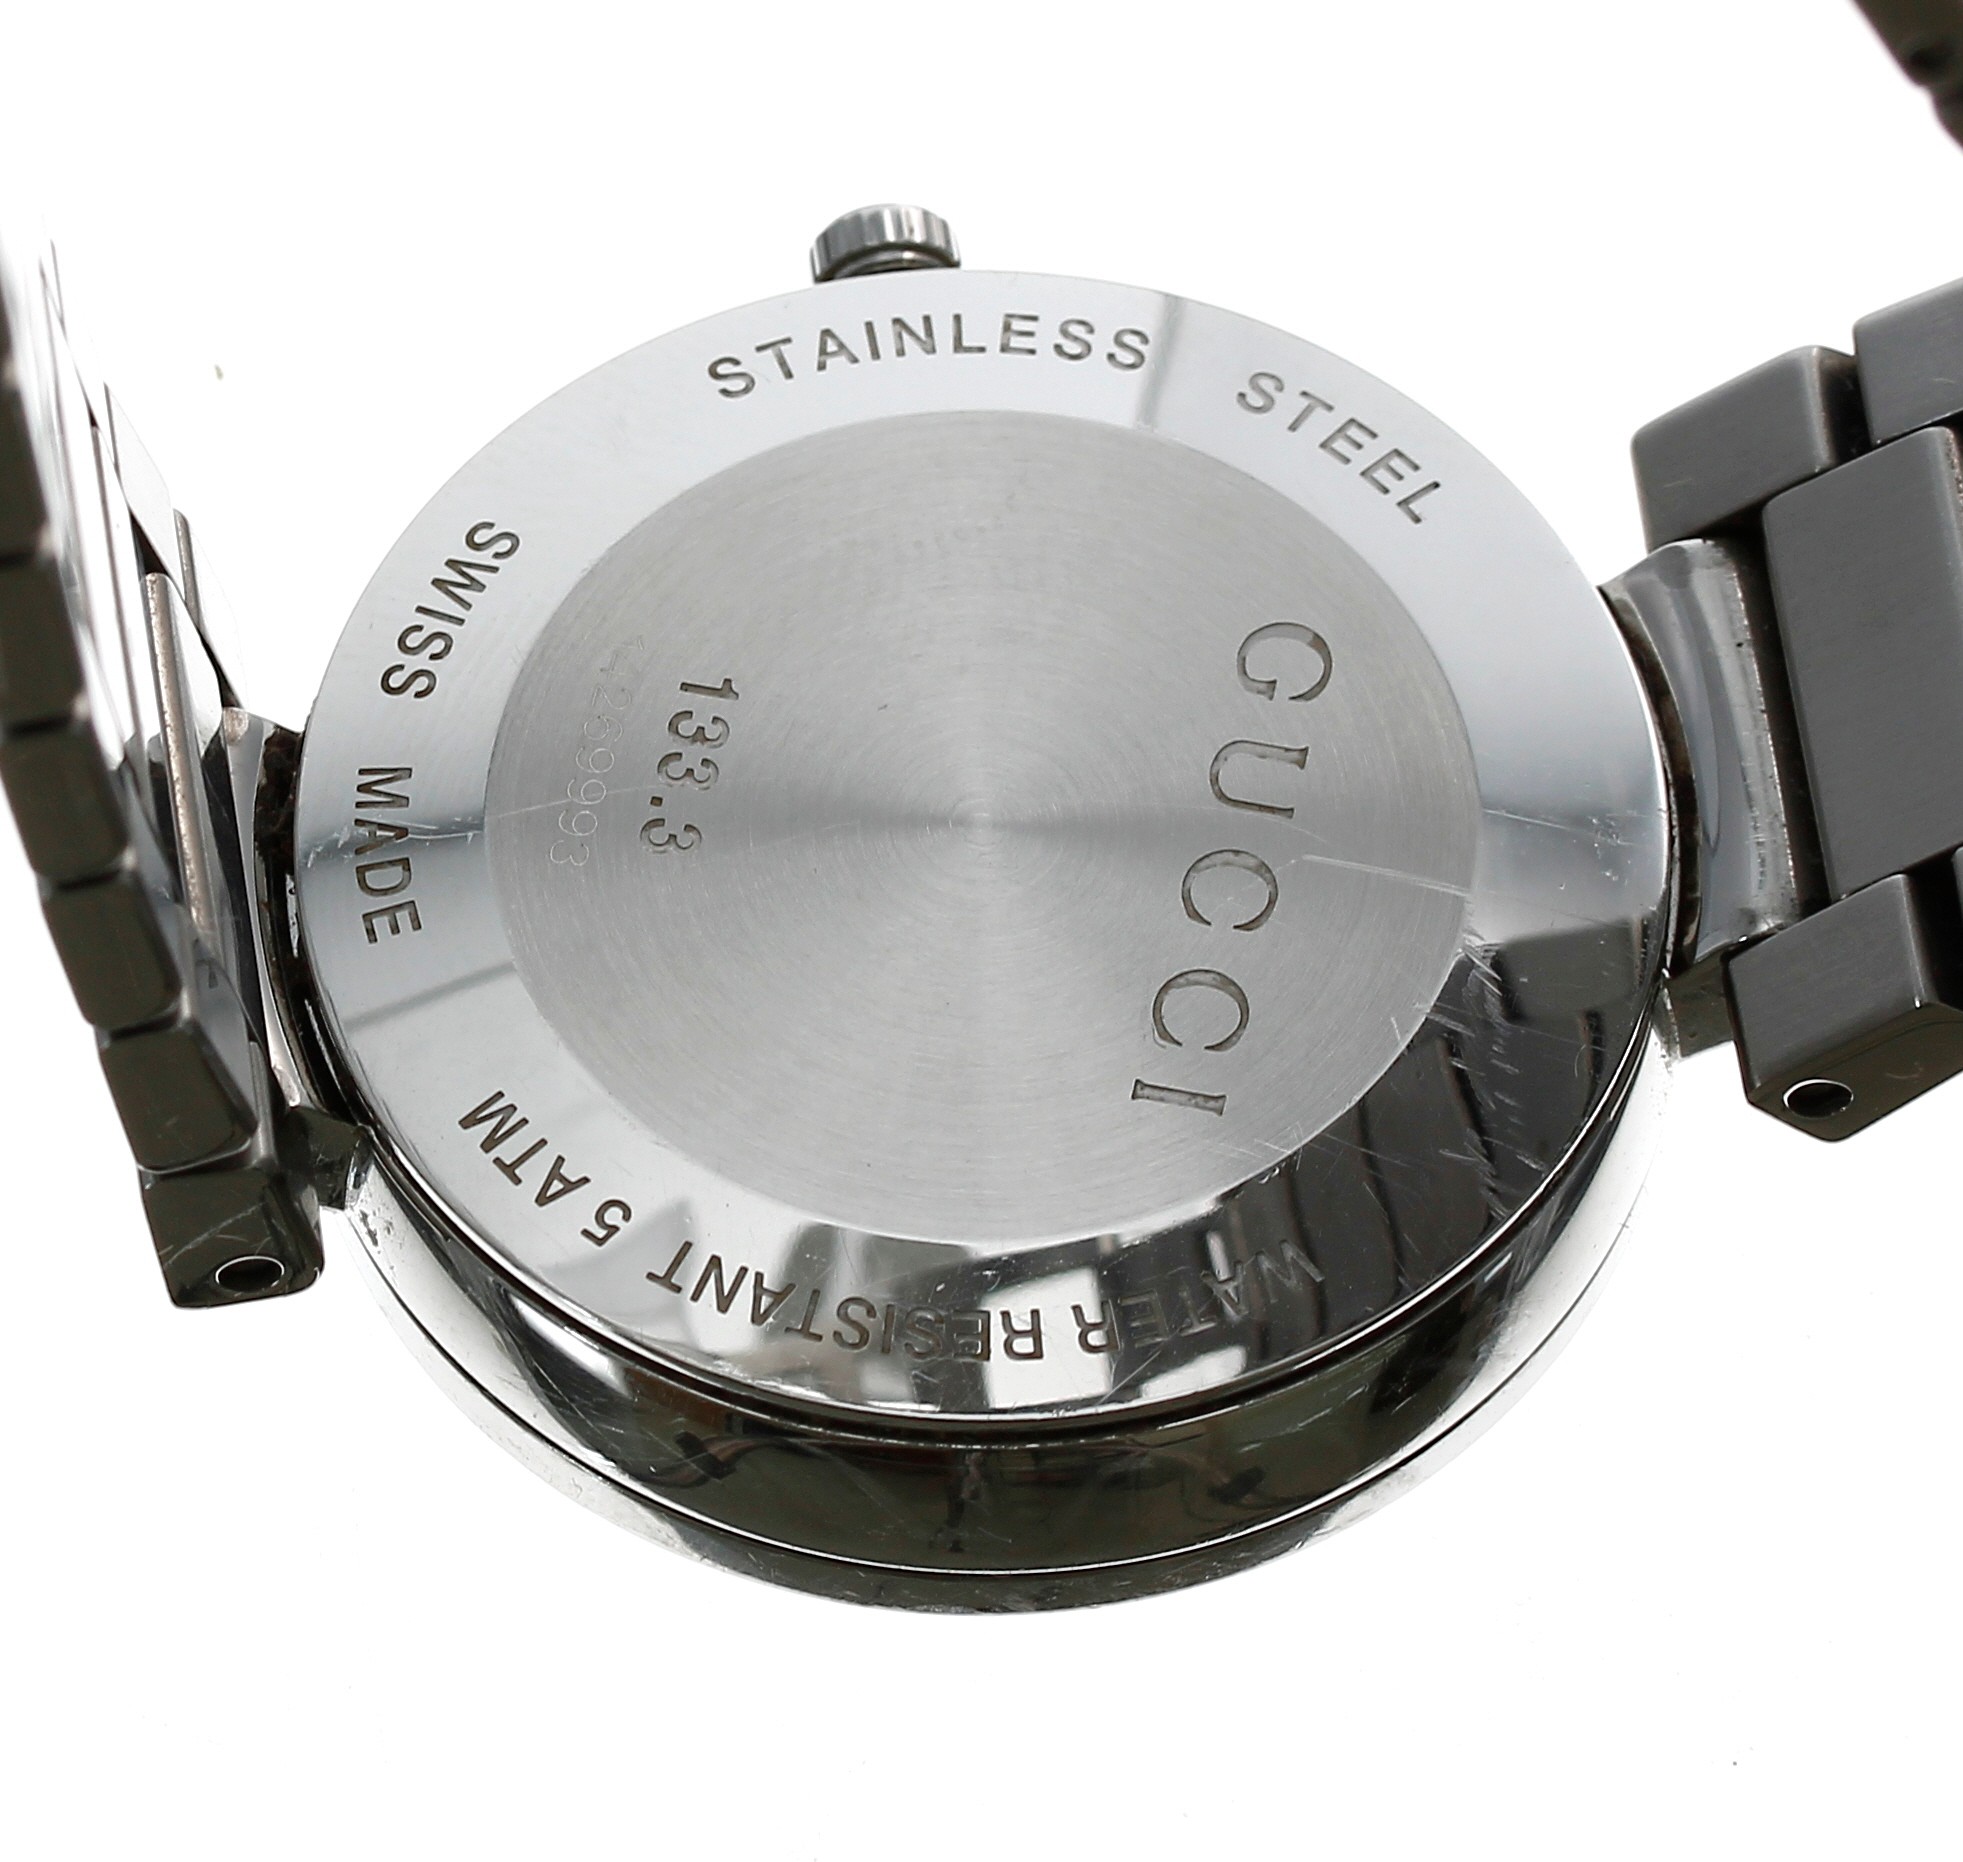 Gucci stainless steel wristwatch, reference no. 133.3, black dial, quartz, Gucci bracelet with - Image 2 of 3